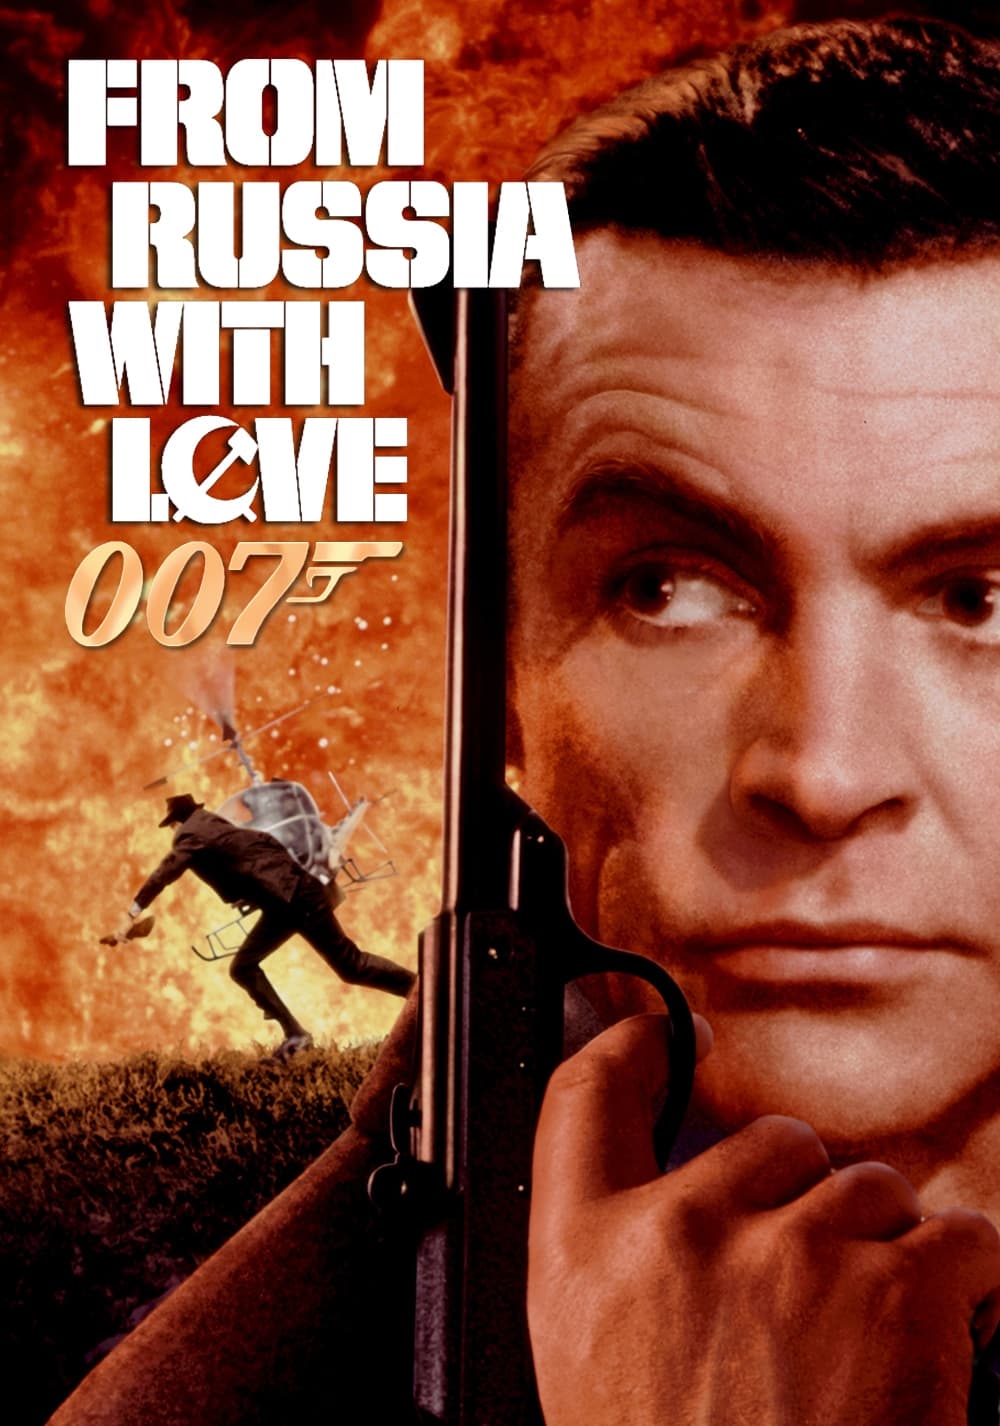 From Russia with Love